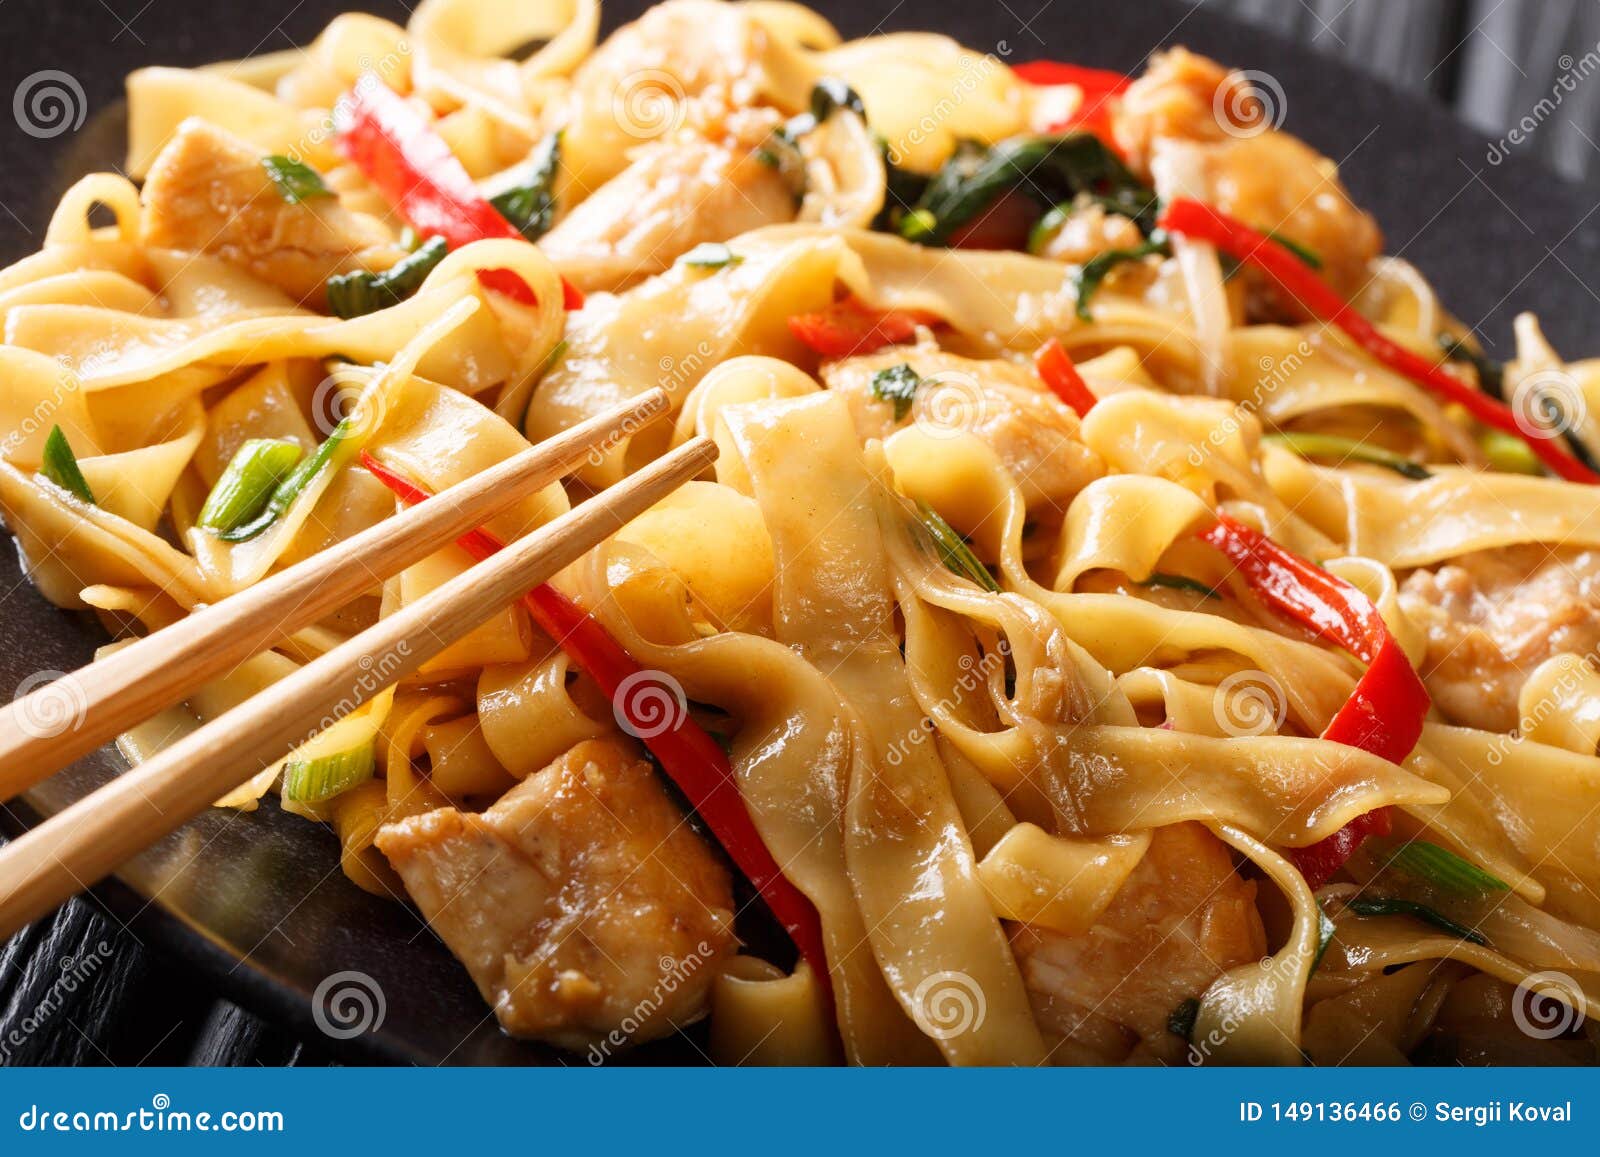 drunken noodles pad kee mao with chicken, basil, chili pepper and sauce close-up on a plate. horizontal